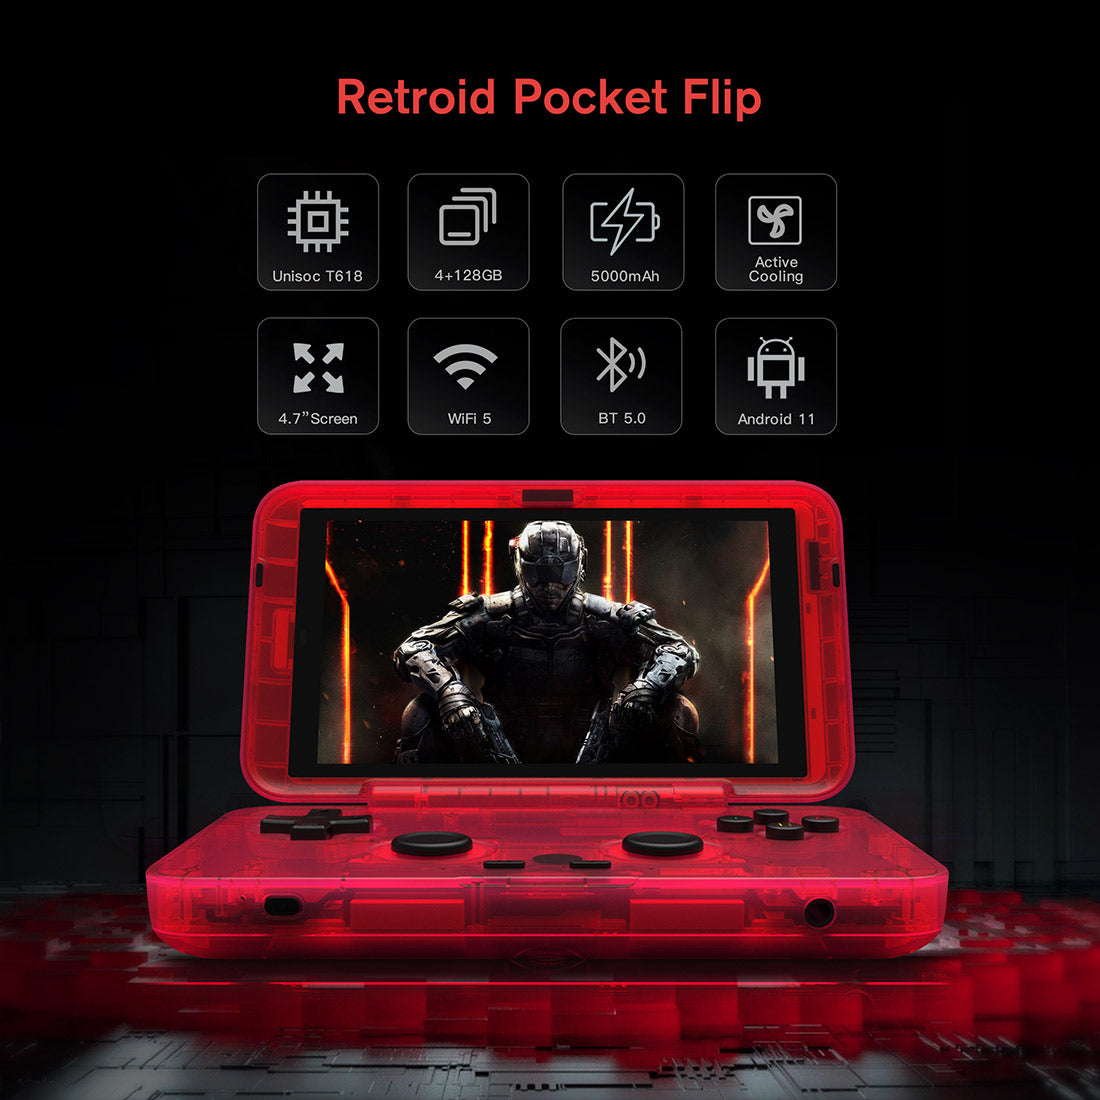 litnxt-Retroid-Pocket-Flip-Android-Handheld-Game-Console-6